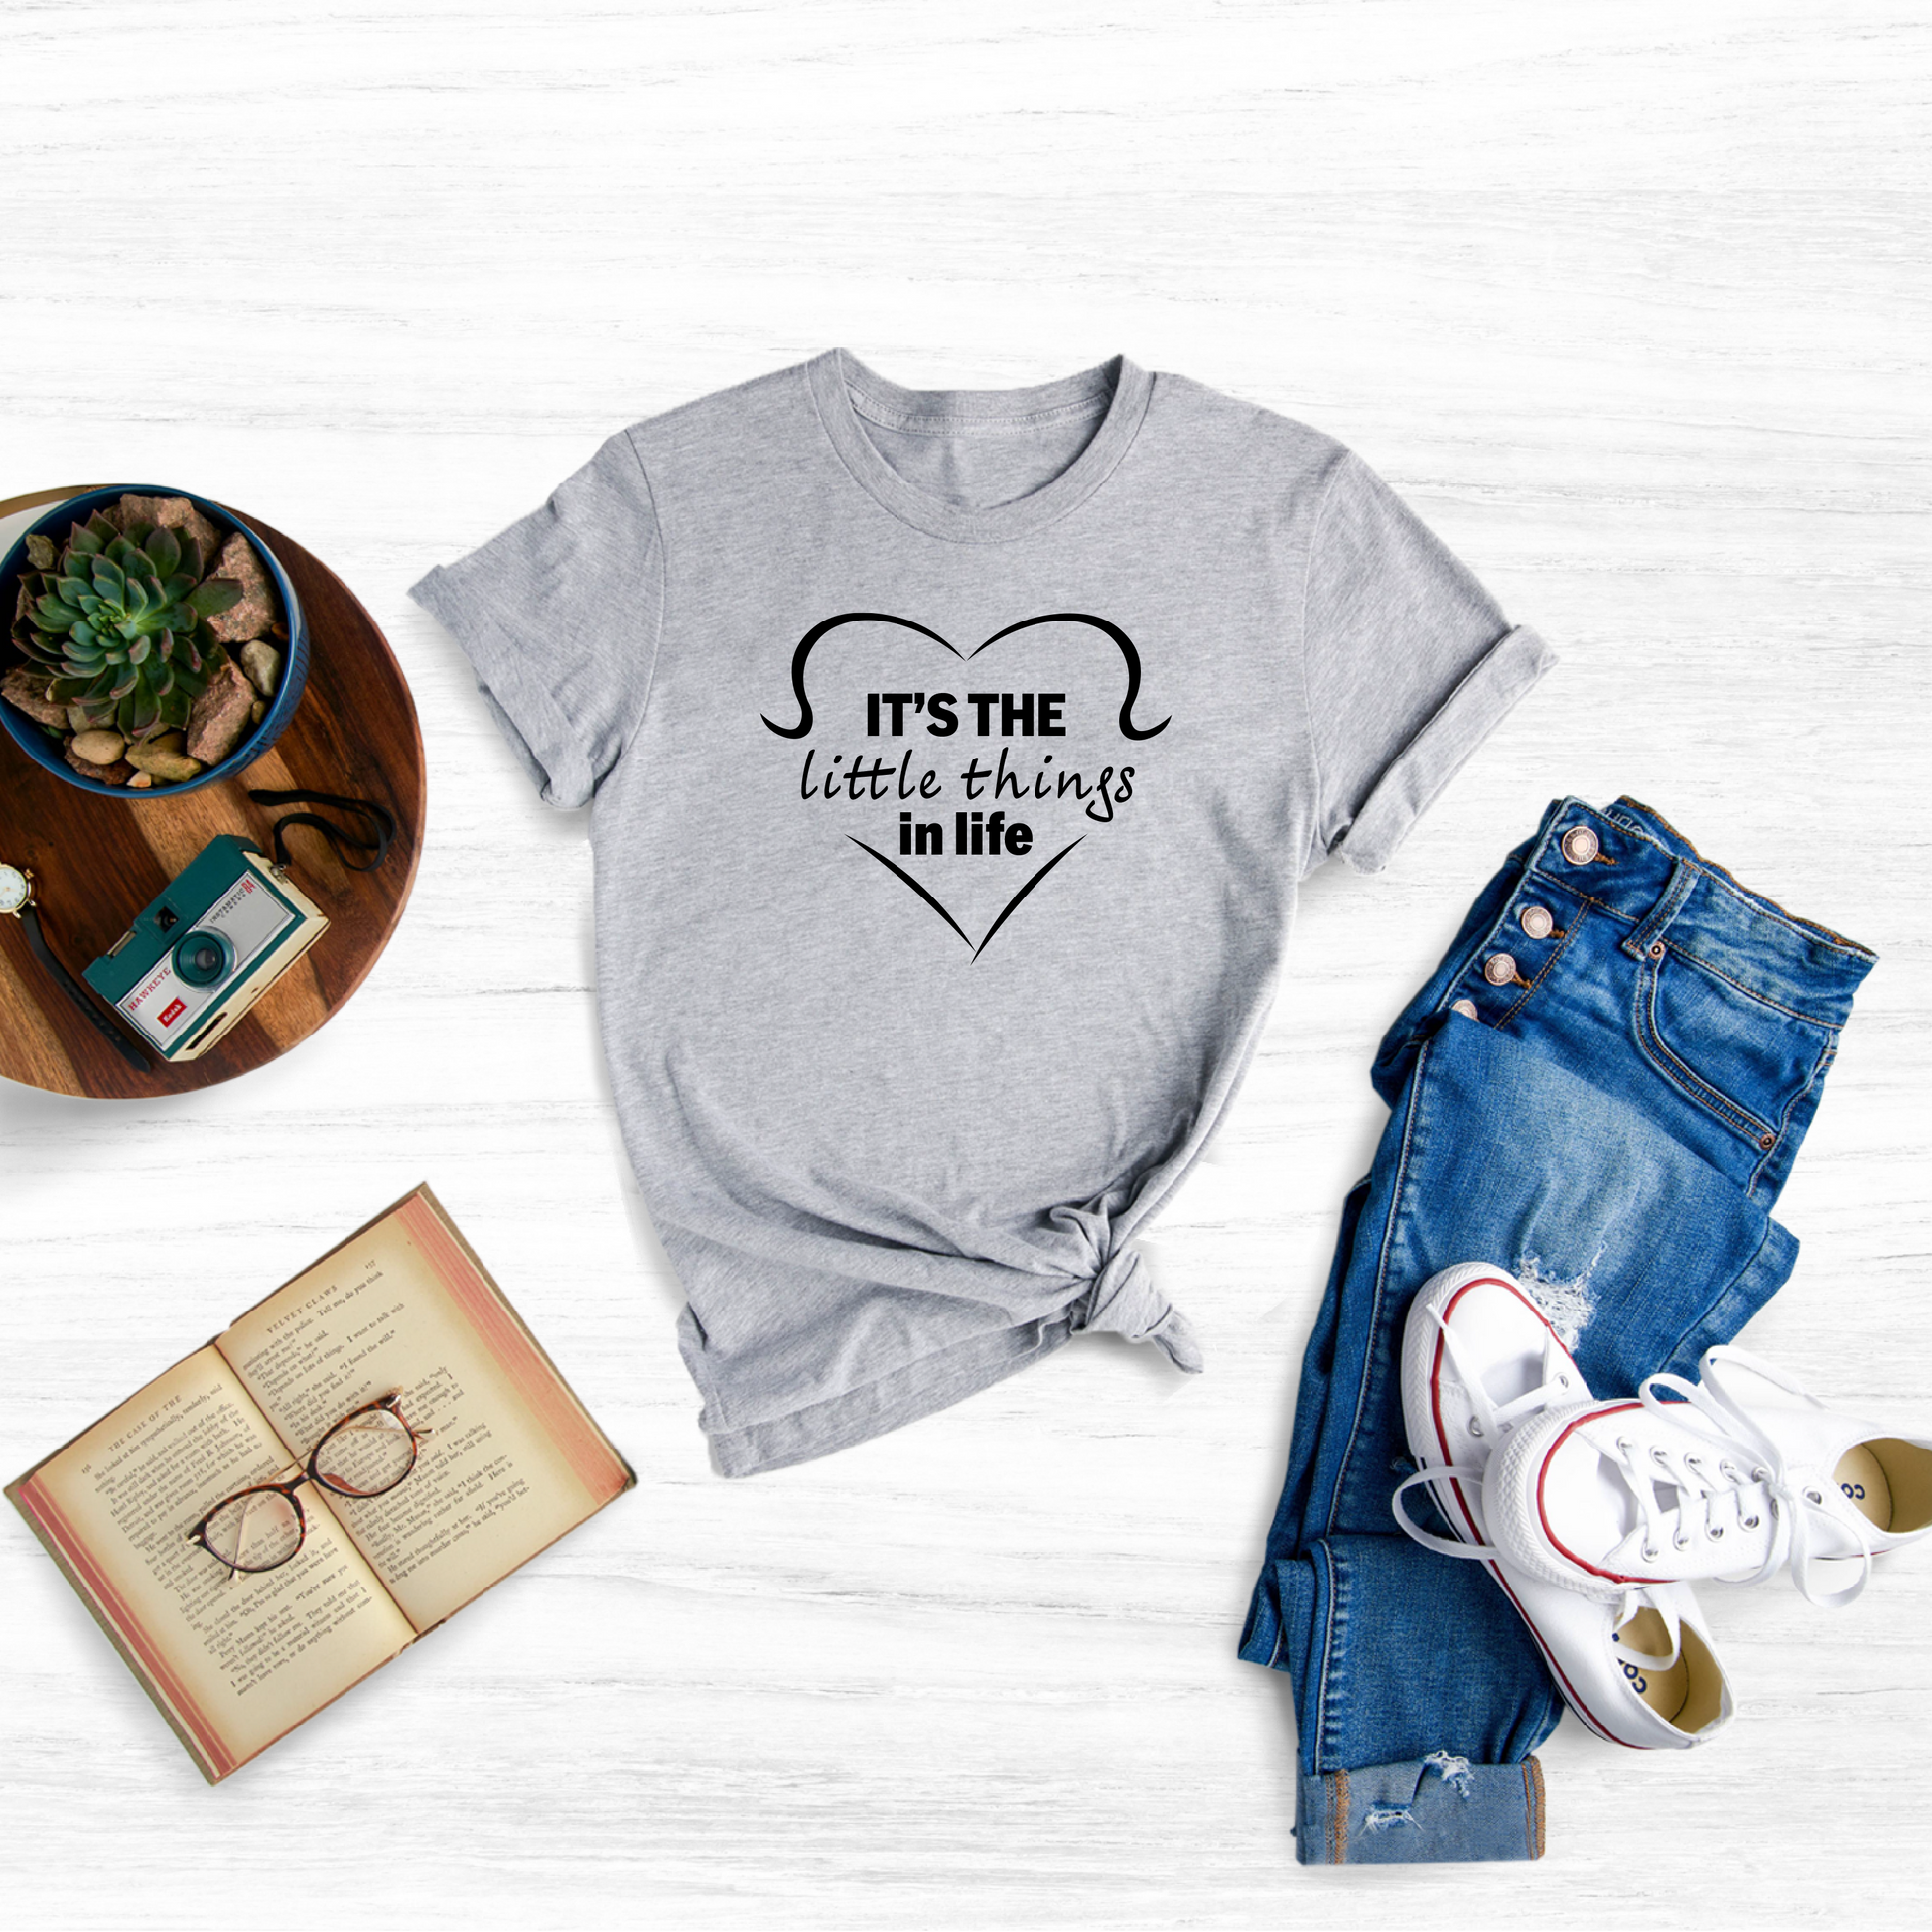 "'It is The Little Thing In Life' Mama Shirt - celebrate motherhood's joys."